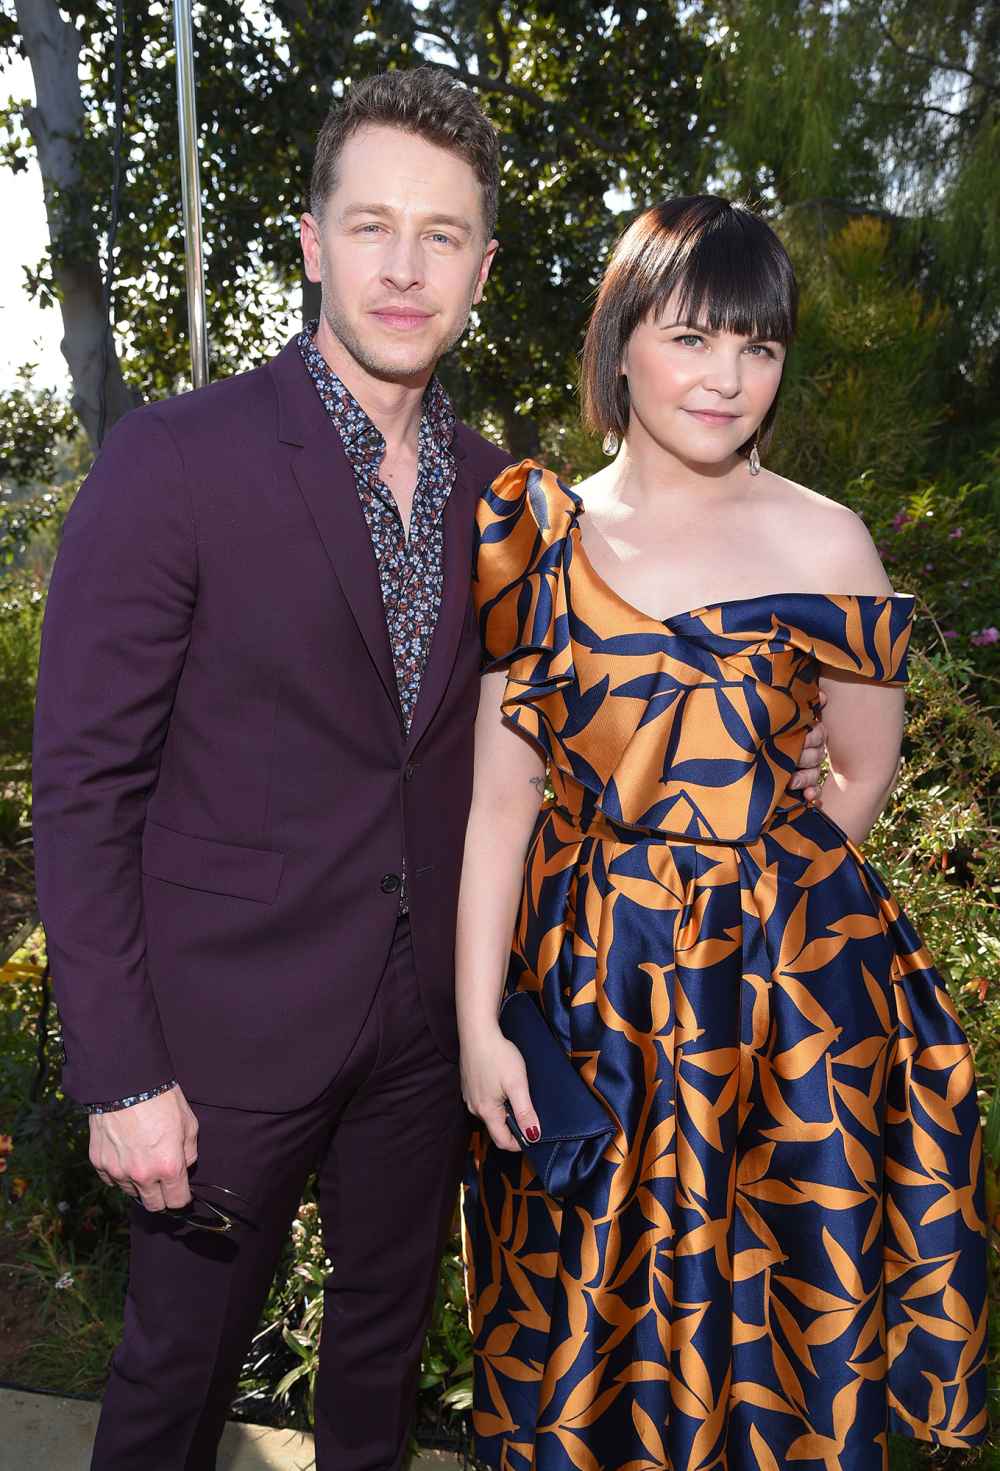 Ginnifer Goodwin and Josh Dallas Have a ‘Village’ Helping Them Make Time for Date Night With 2 Kids